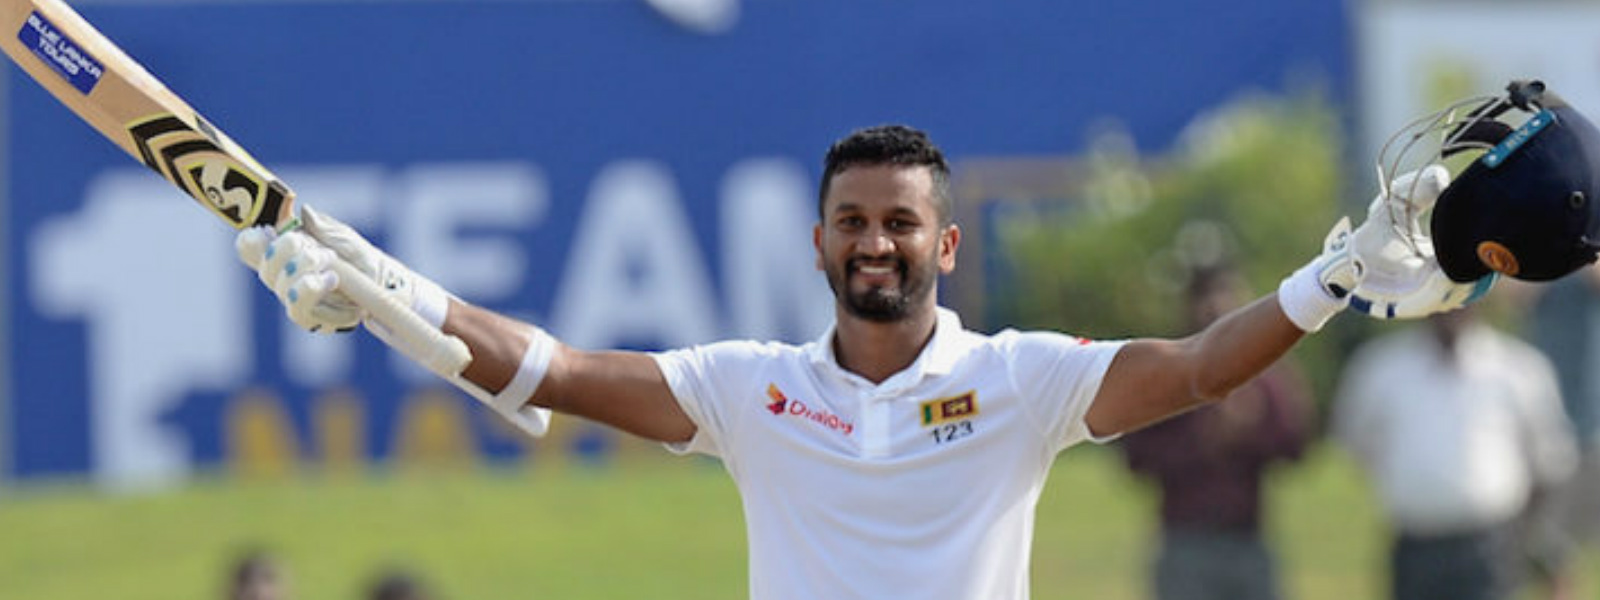 Skipper leads SL to comfortable win in Galle